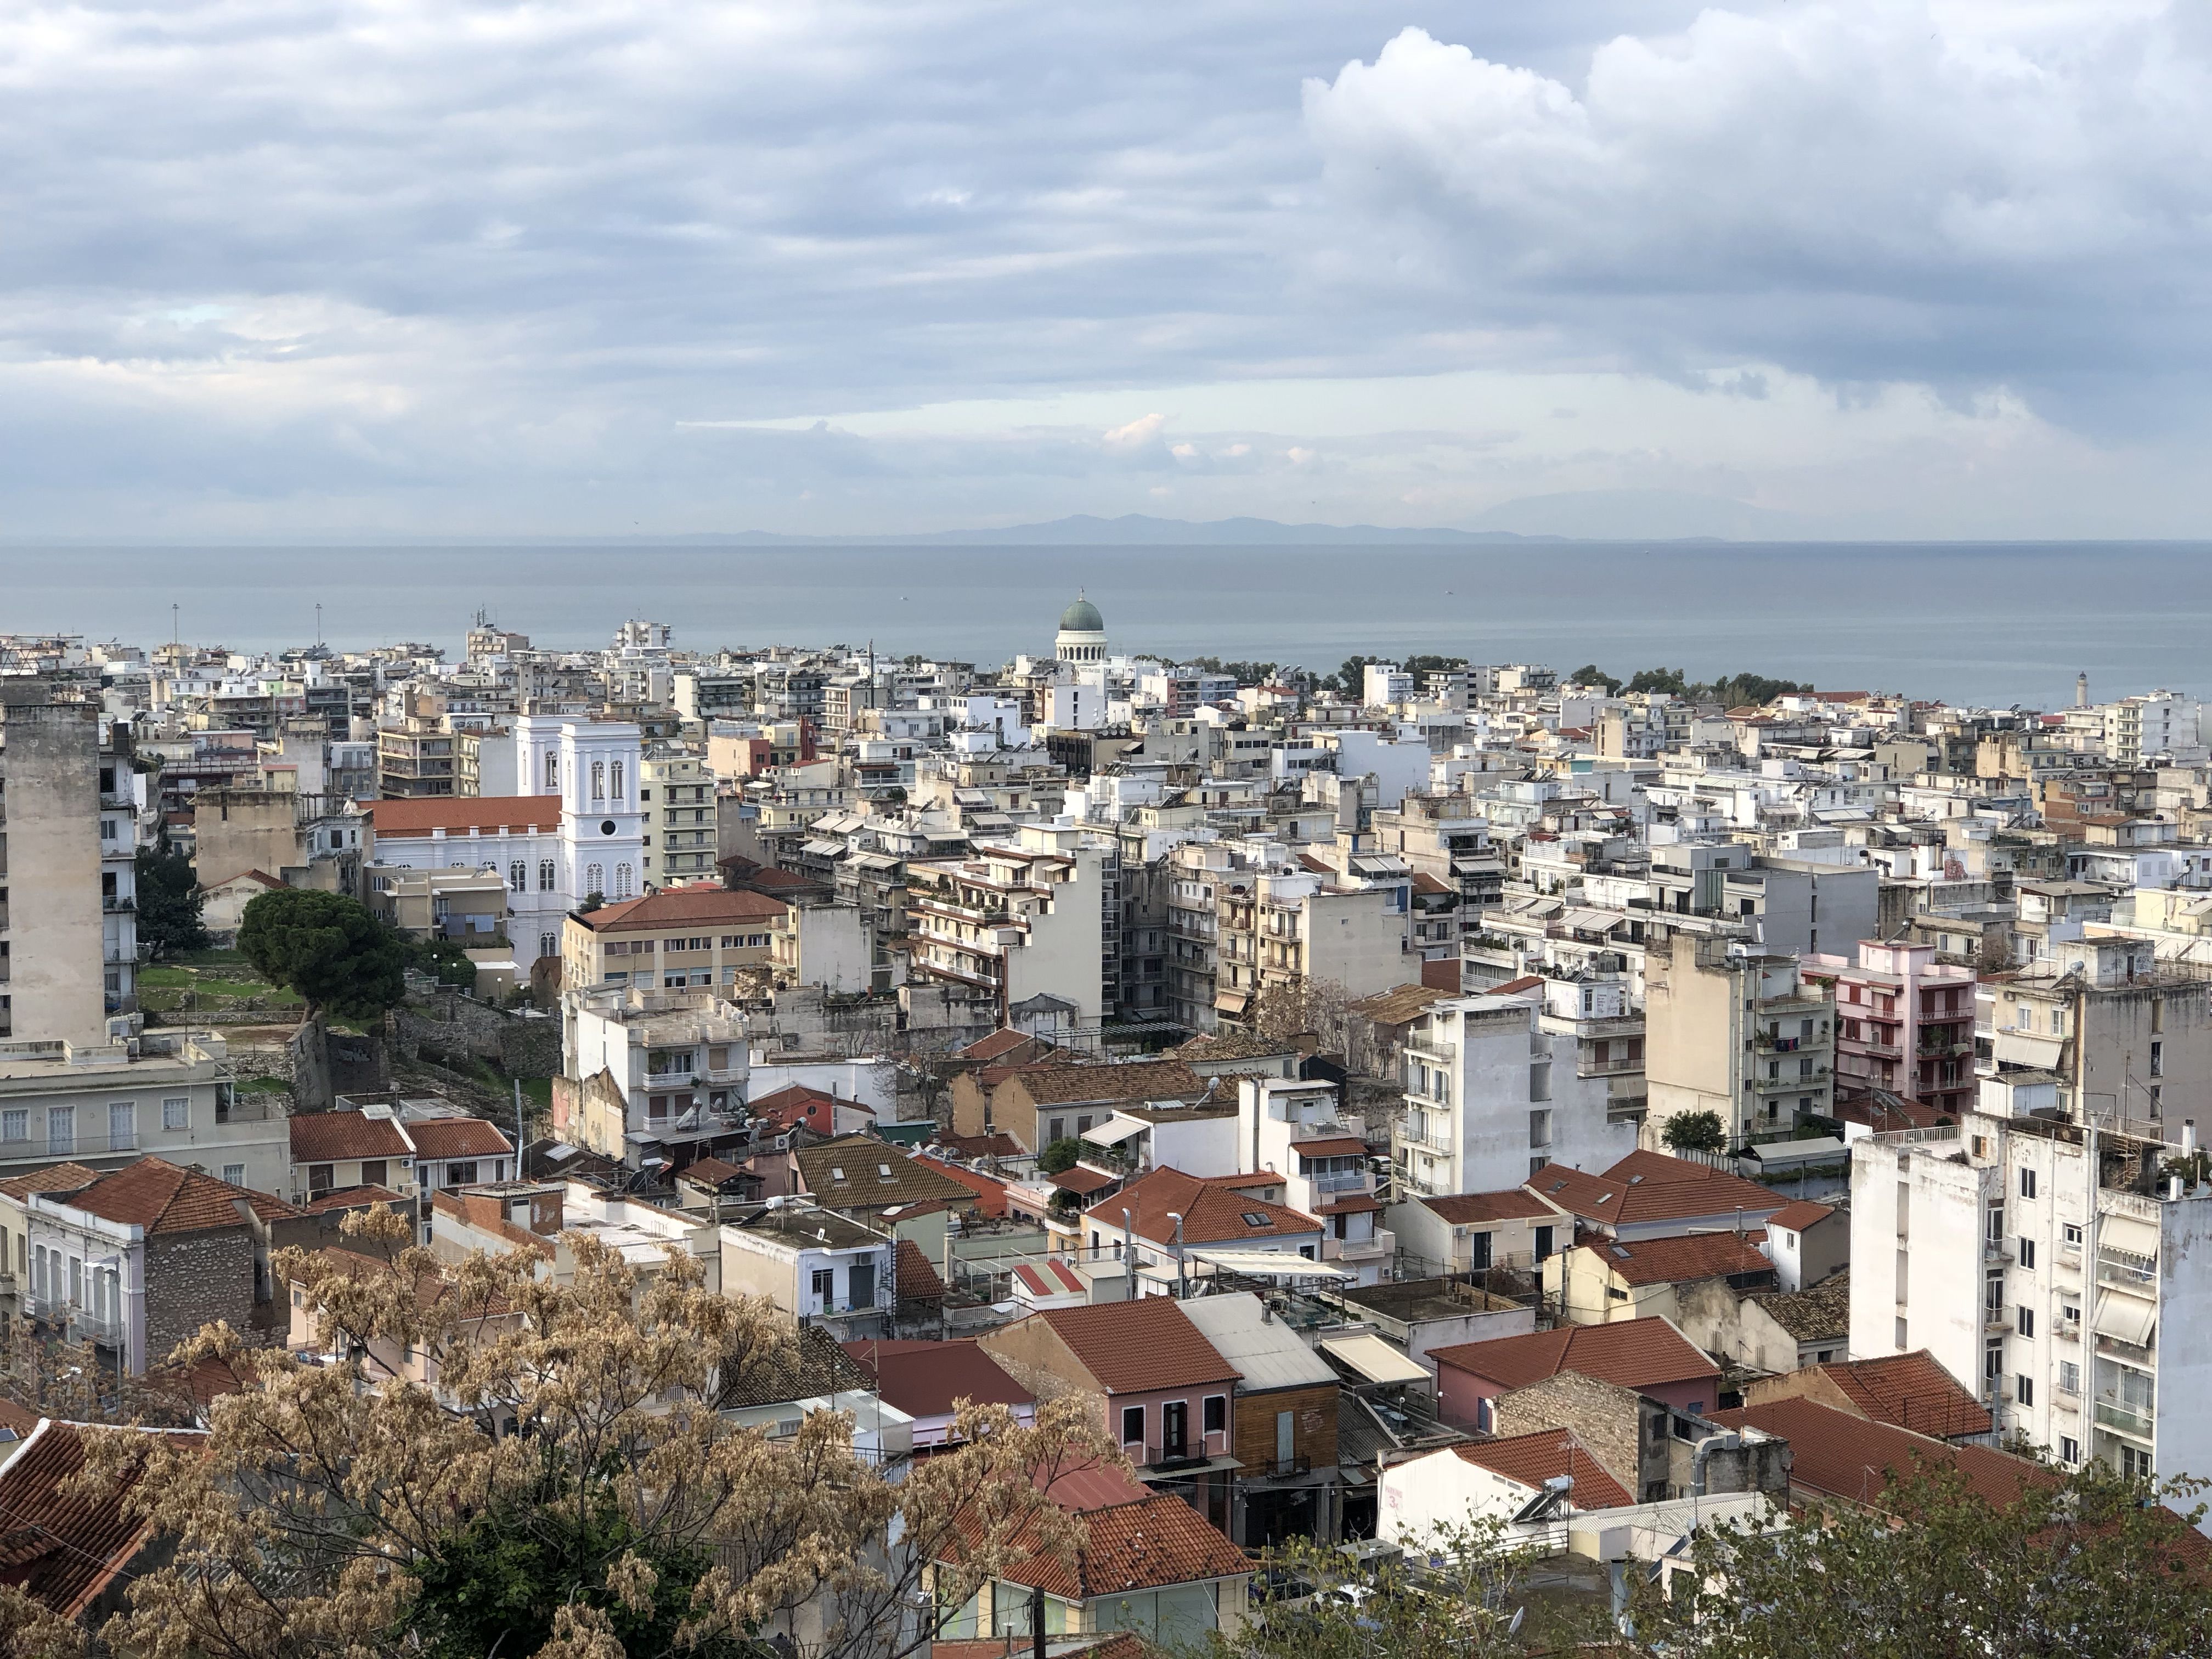 Looking out over Patras, a jumble of white buildings and red roofs until we reach the sea. In the centre, there is a church with a dome on top.